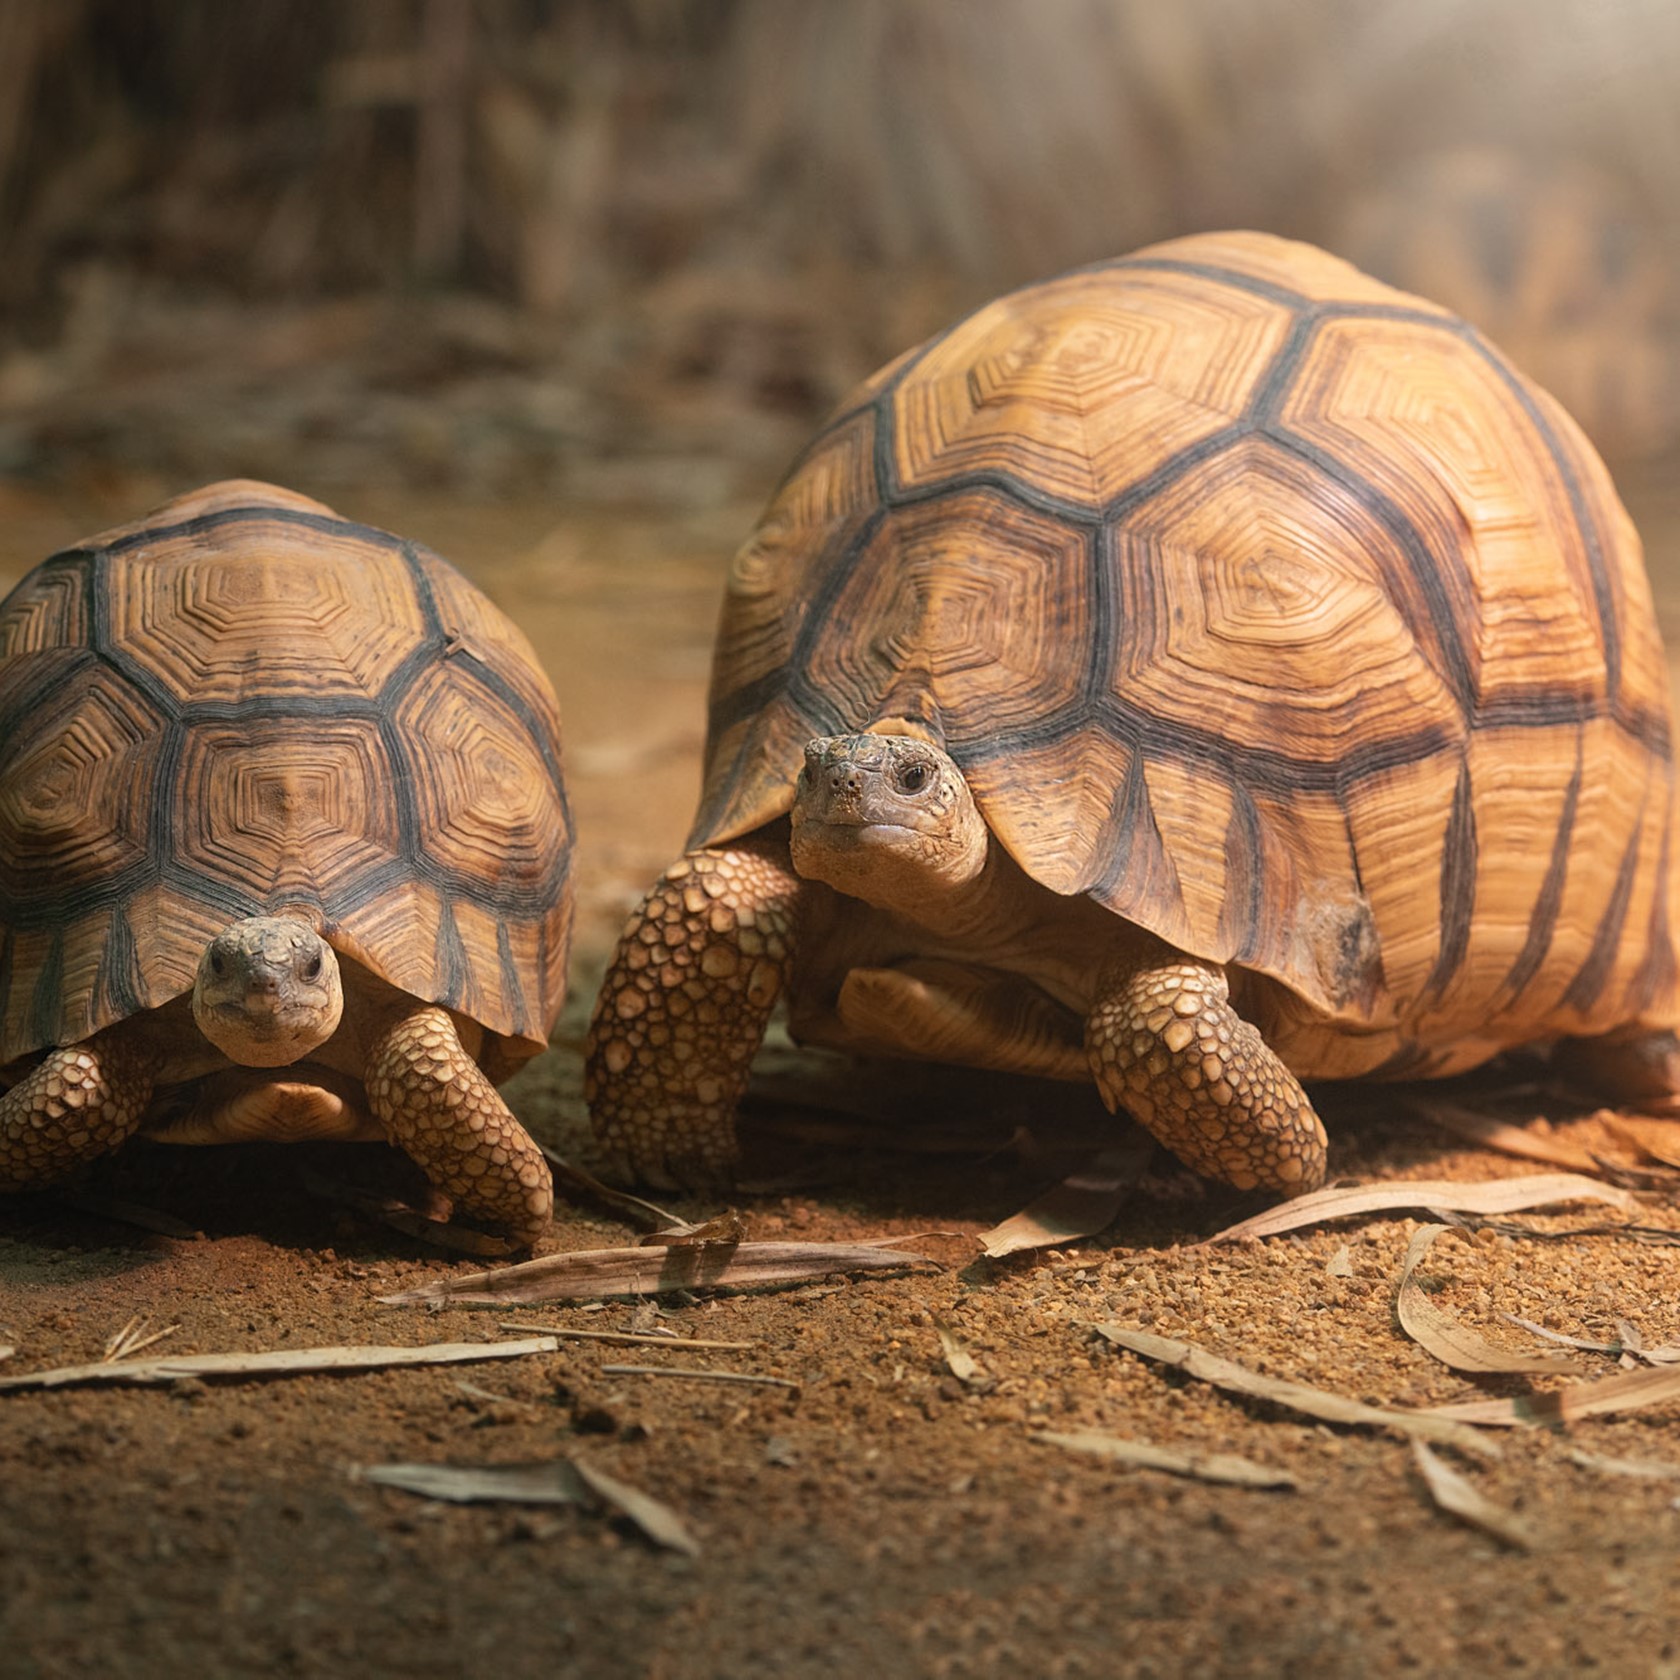 Two Ploughshare Tortoises at Jersey Zoo